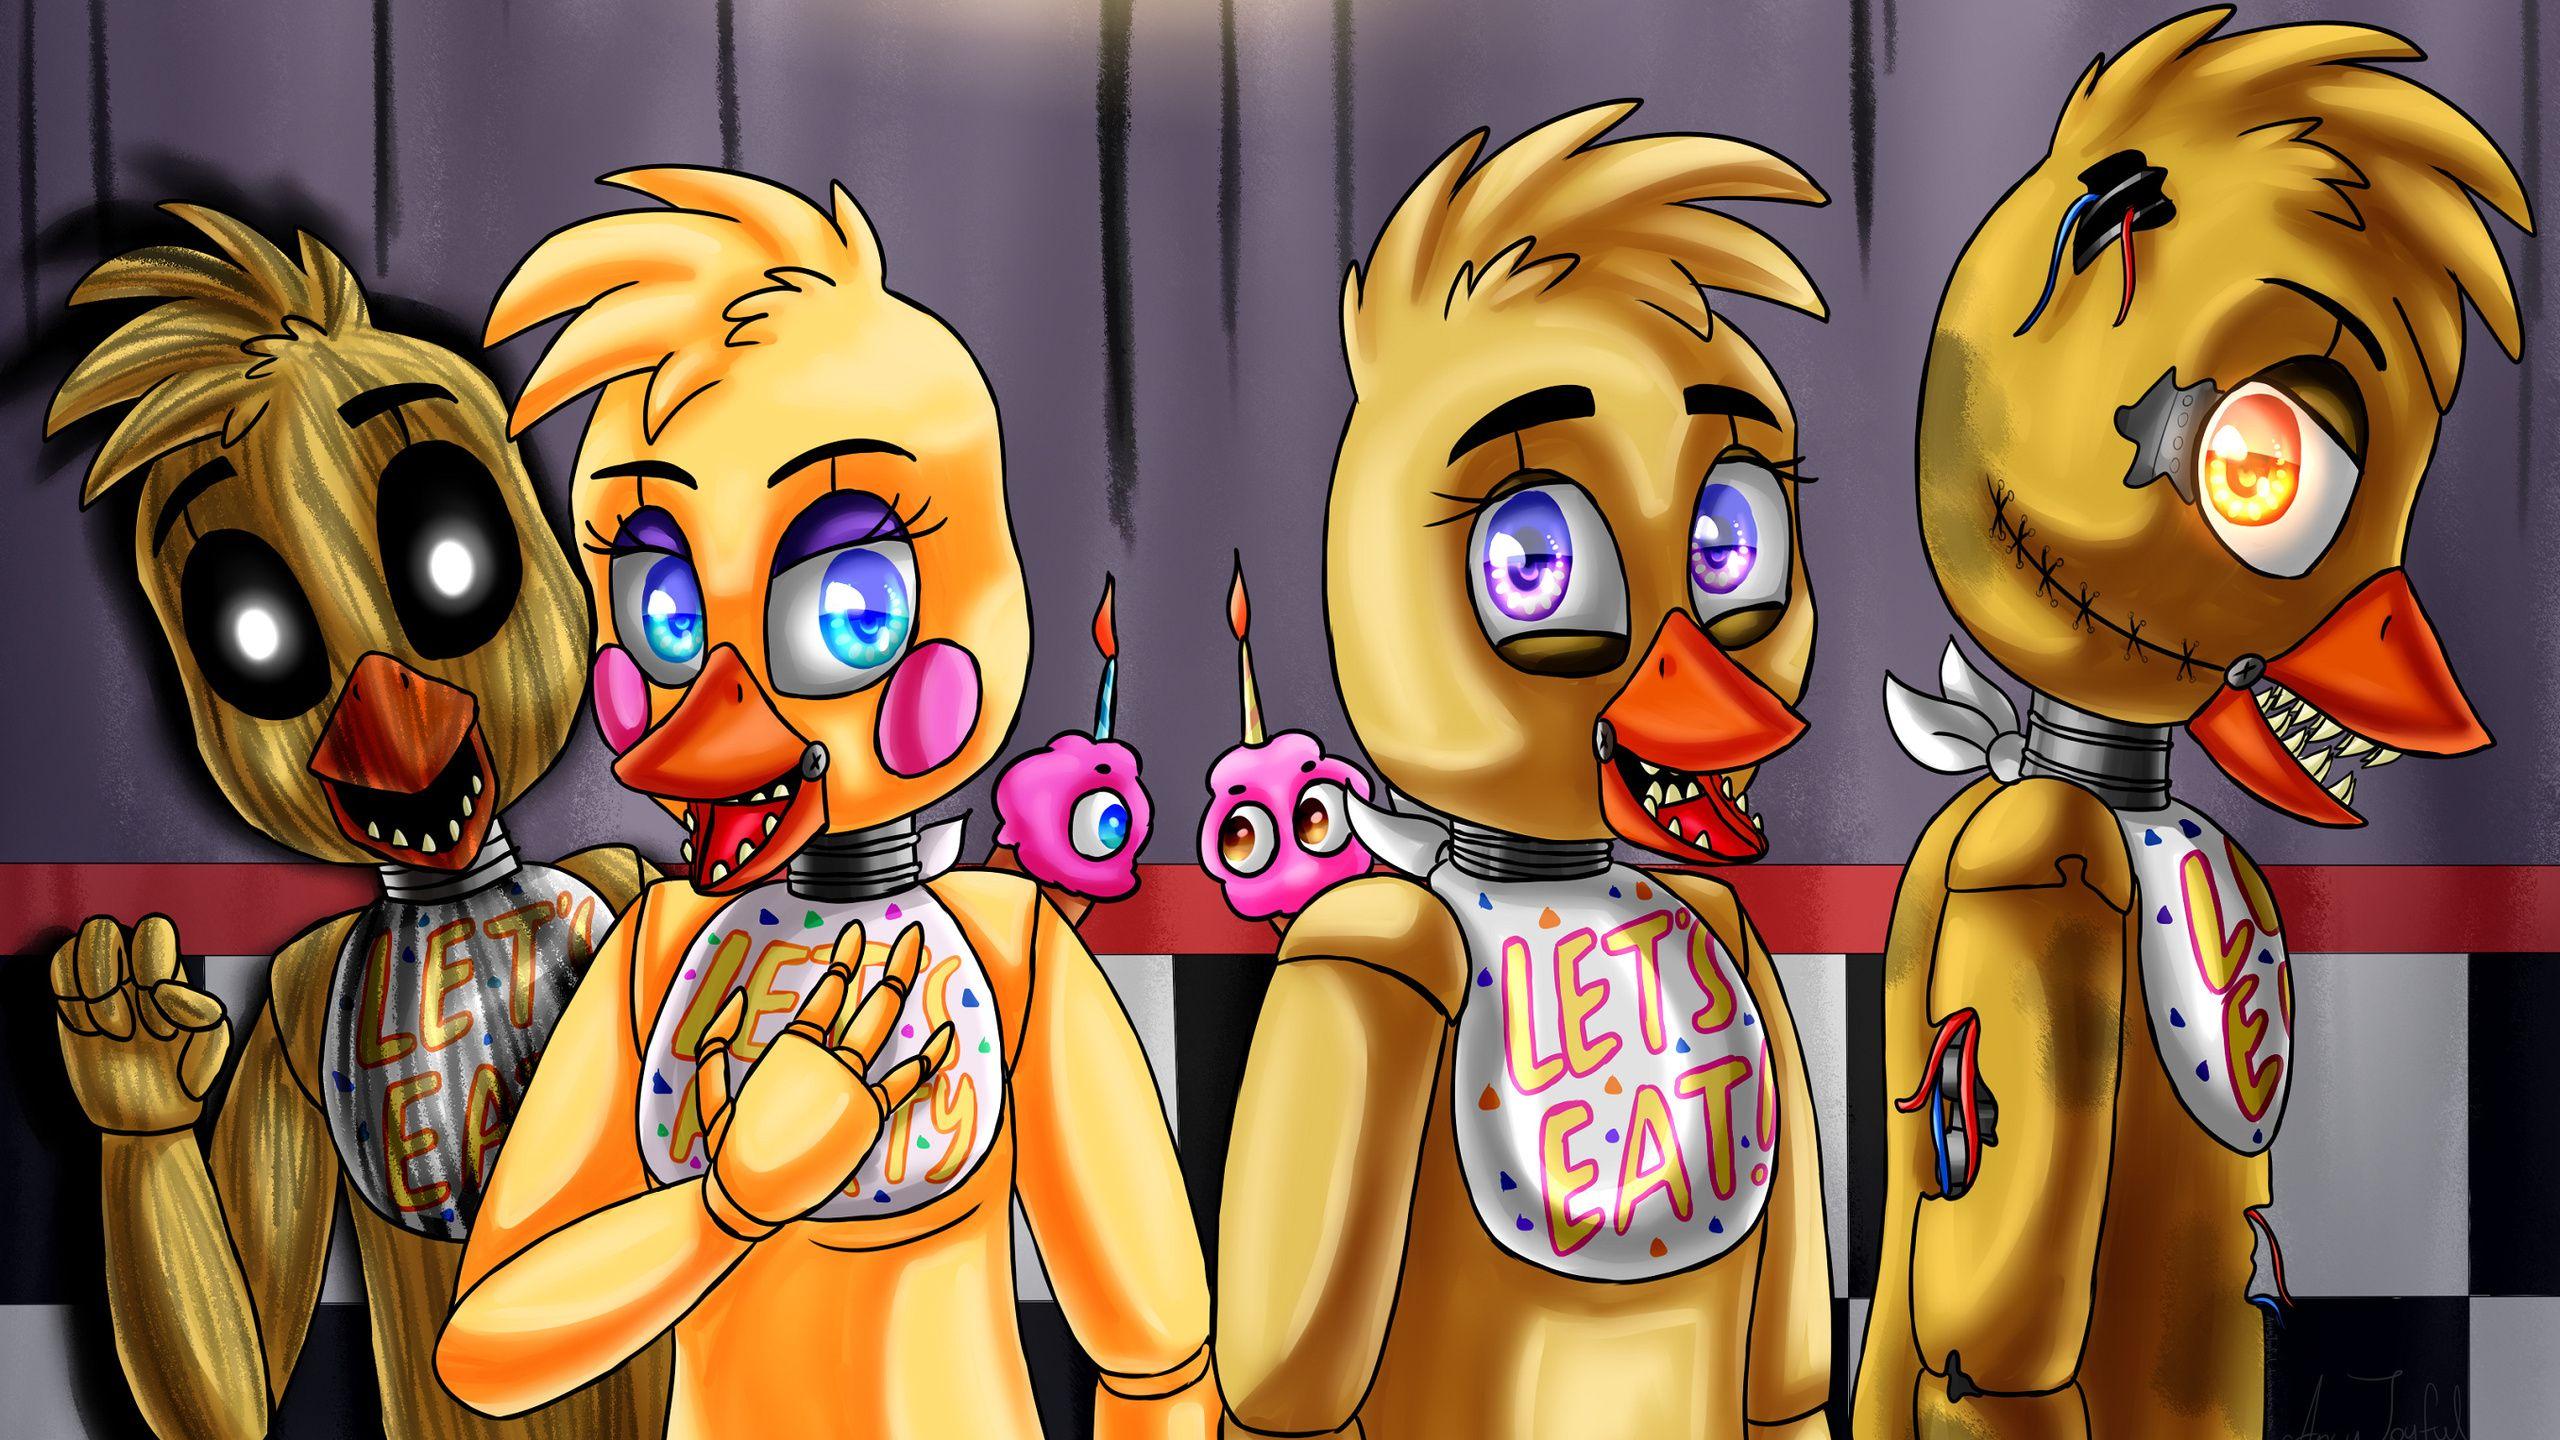 Five Nights At Freddy's Chica Wallpaper DOWNLOAD By NiksonYT On